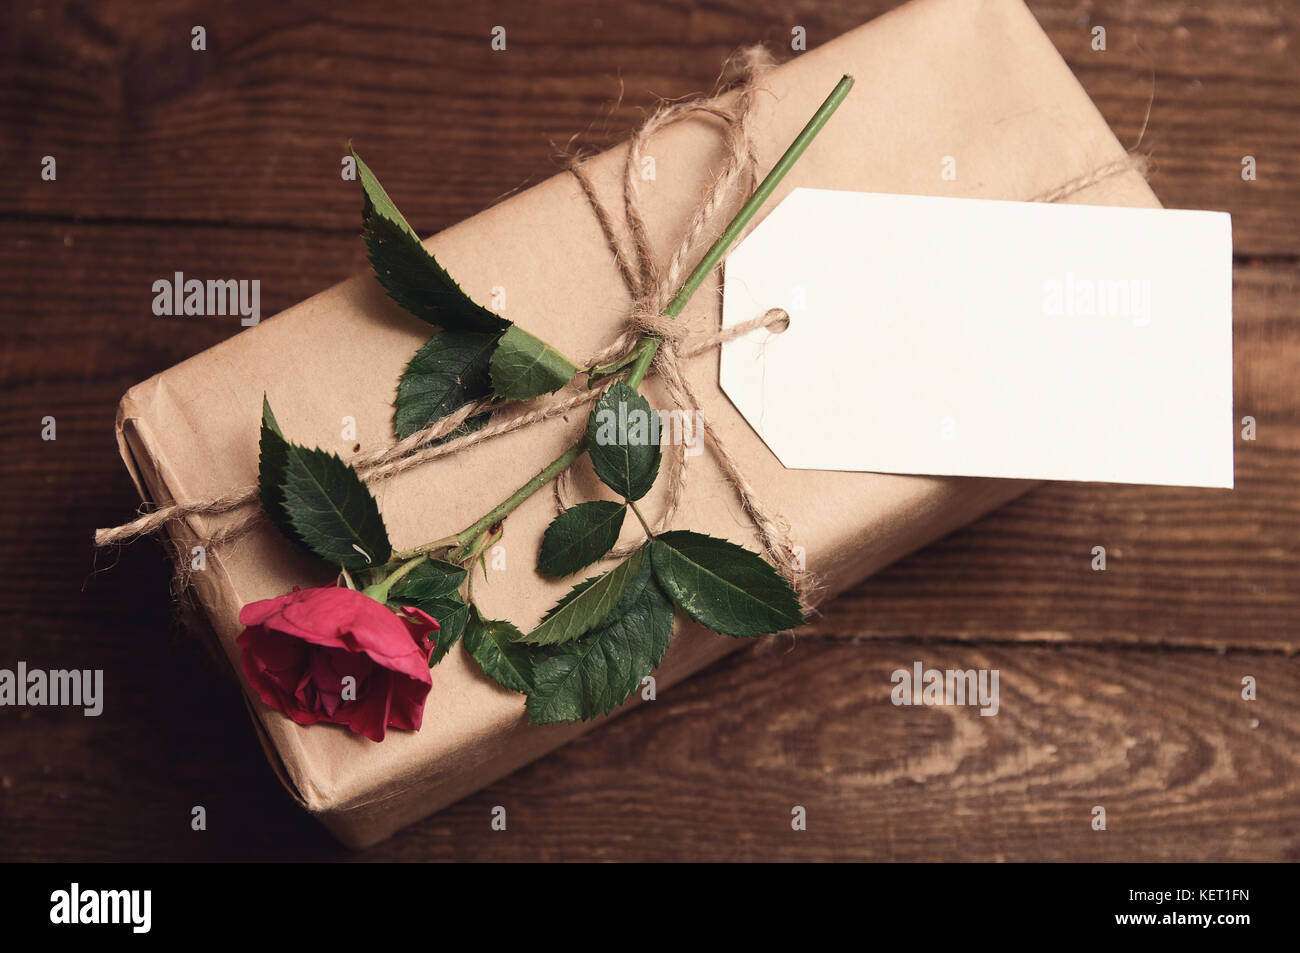 gift wrapped in kraft paper with rose flower on top Stock Photo